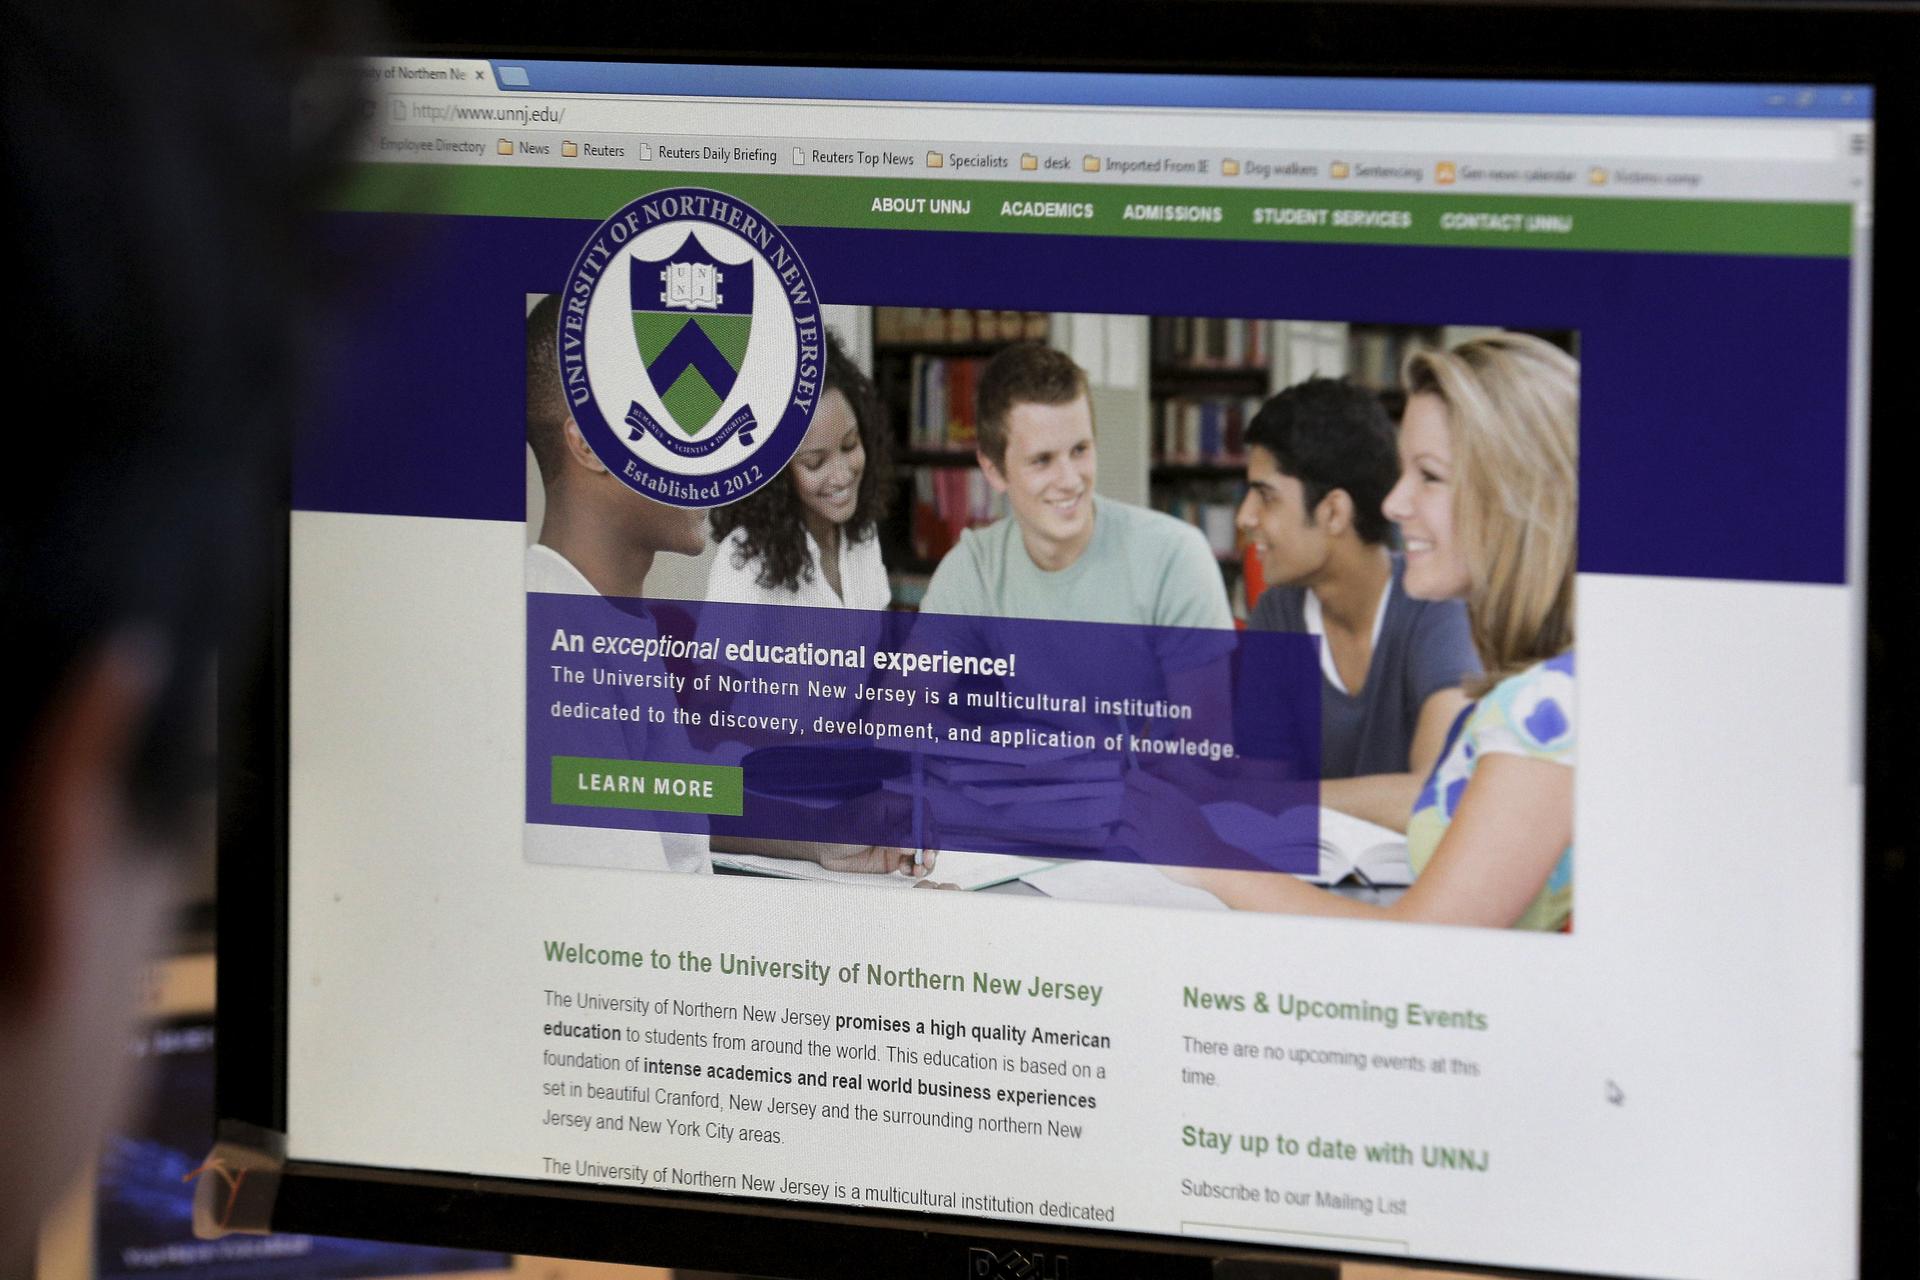 The website for University of Northern New Jersey, a phony university set up by U.S. authorities to lure criminals who defraud the country's Student and Exchange Visitor Program, is seen on a screen in New York April 5, 2016.